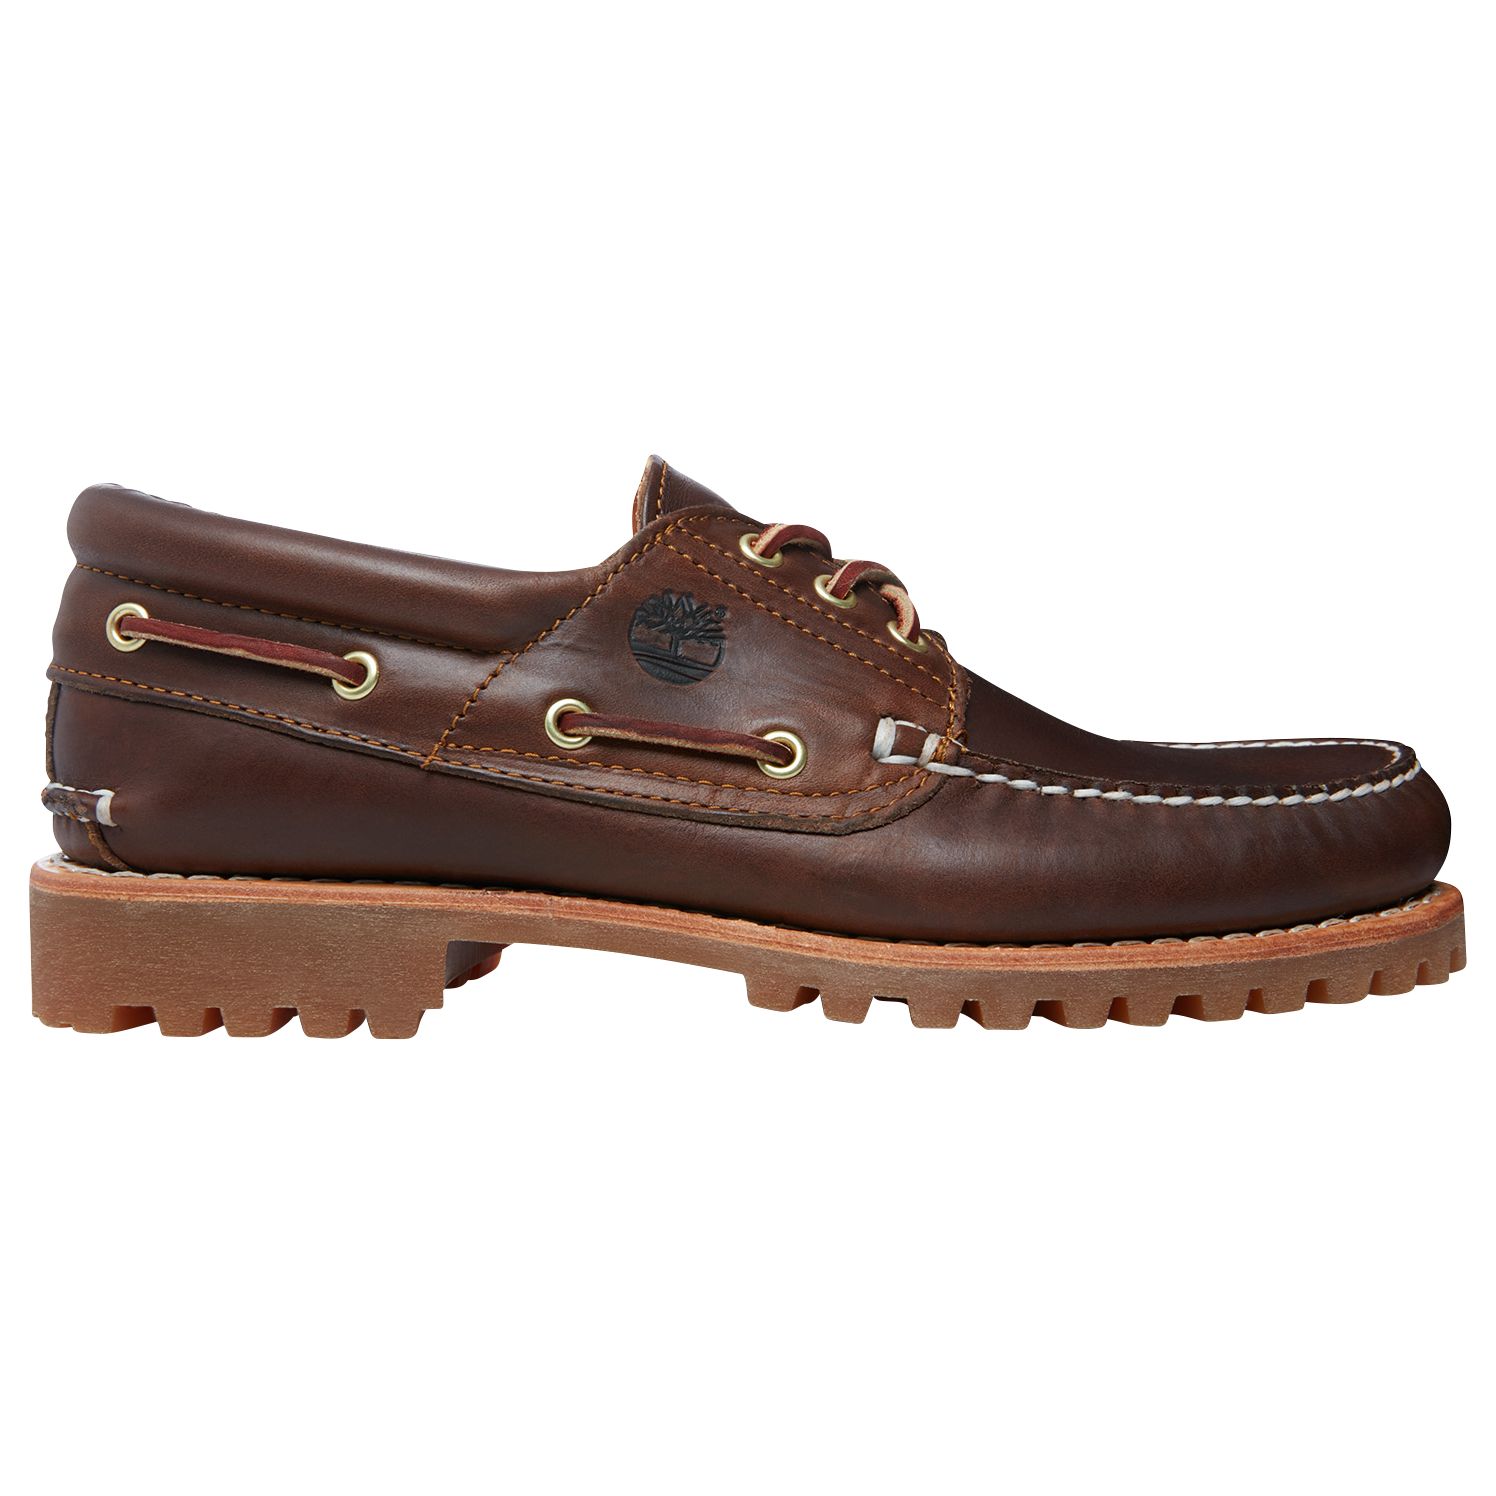 Buy Timberland Handsewn Boat Shoes Online at johnlewis